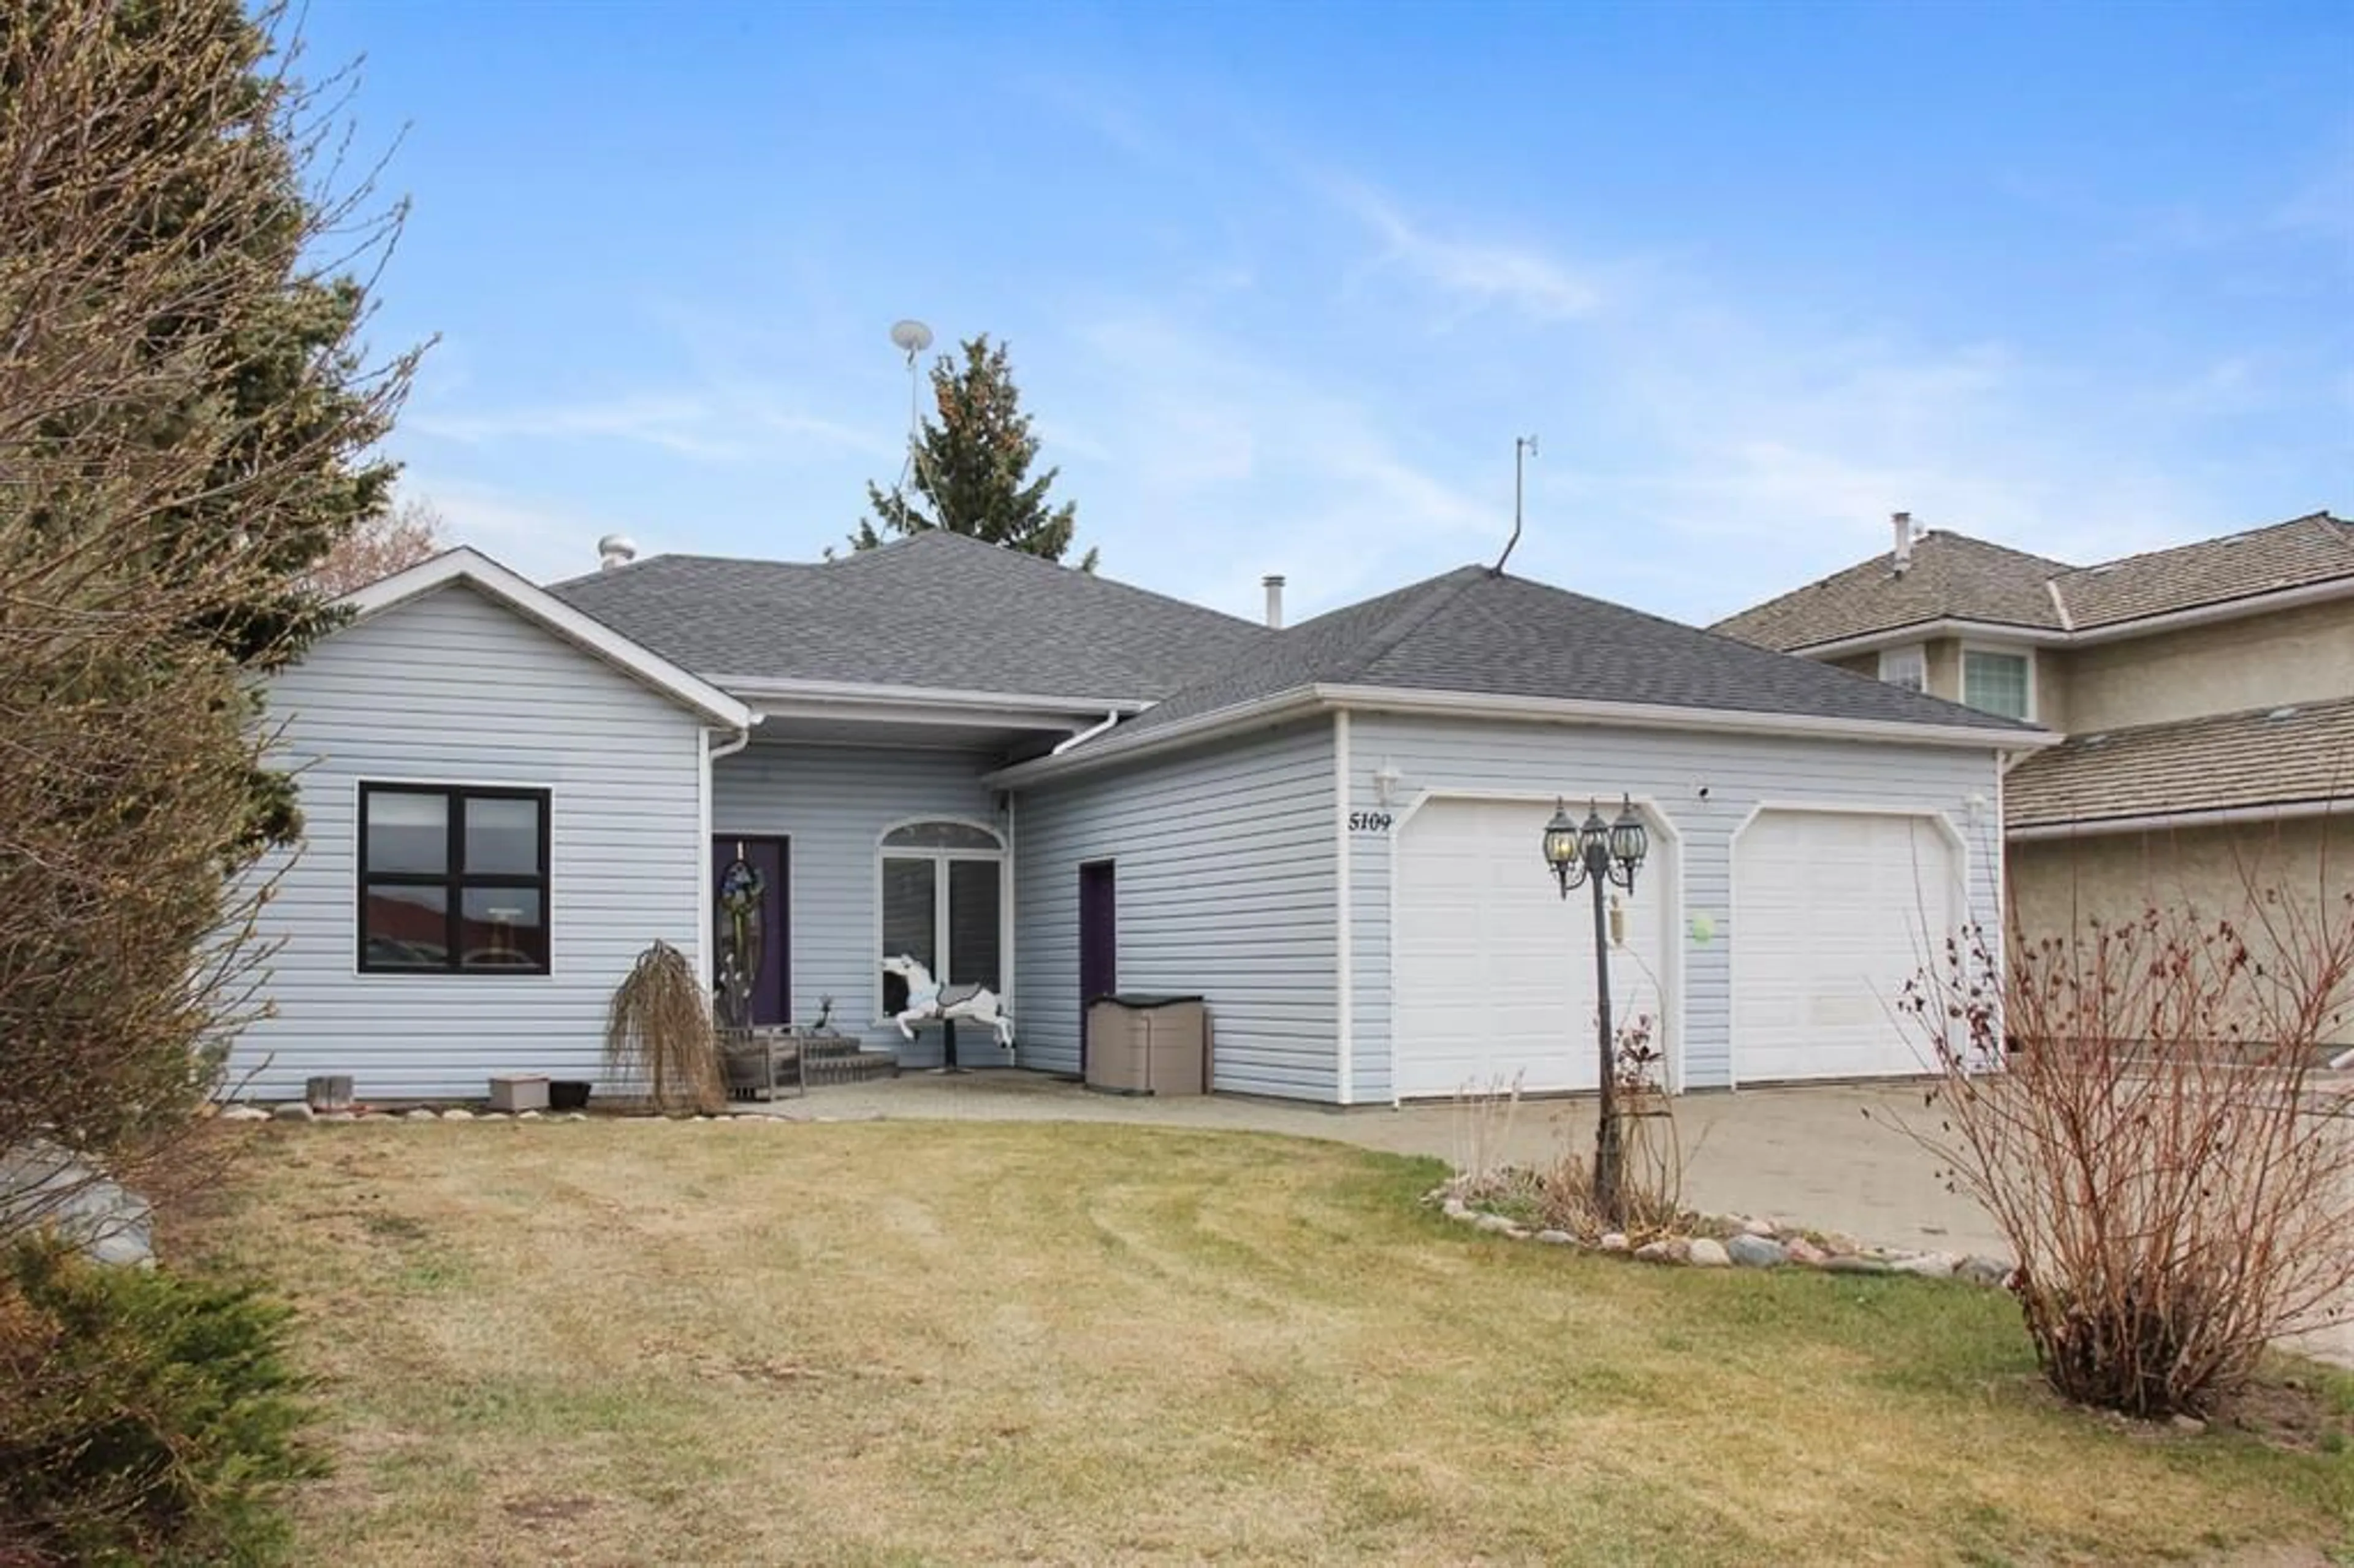 Frontside or backside of a home for 5109 59 St, Daysland Alberta T0B 1A0